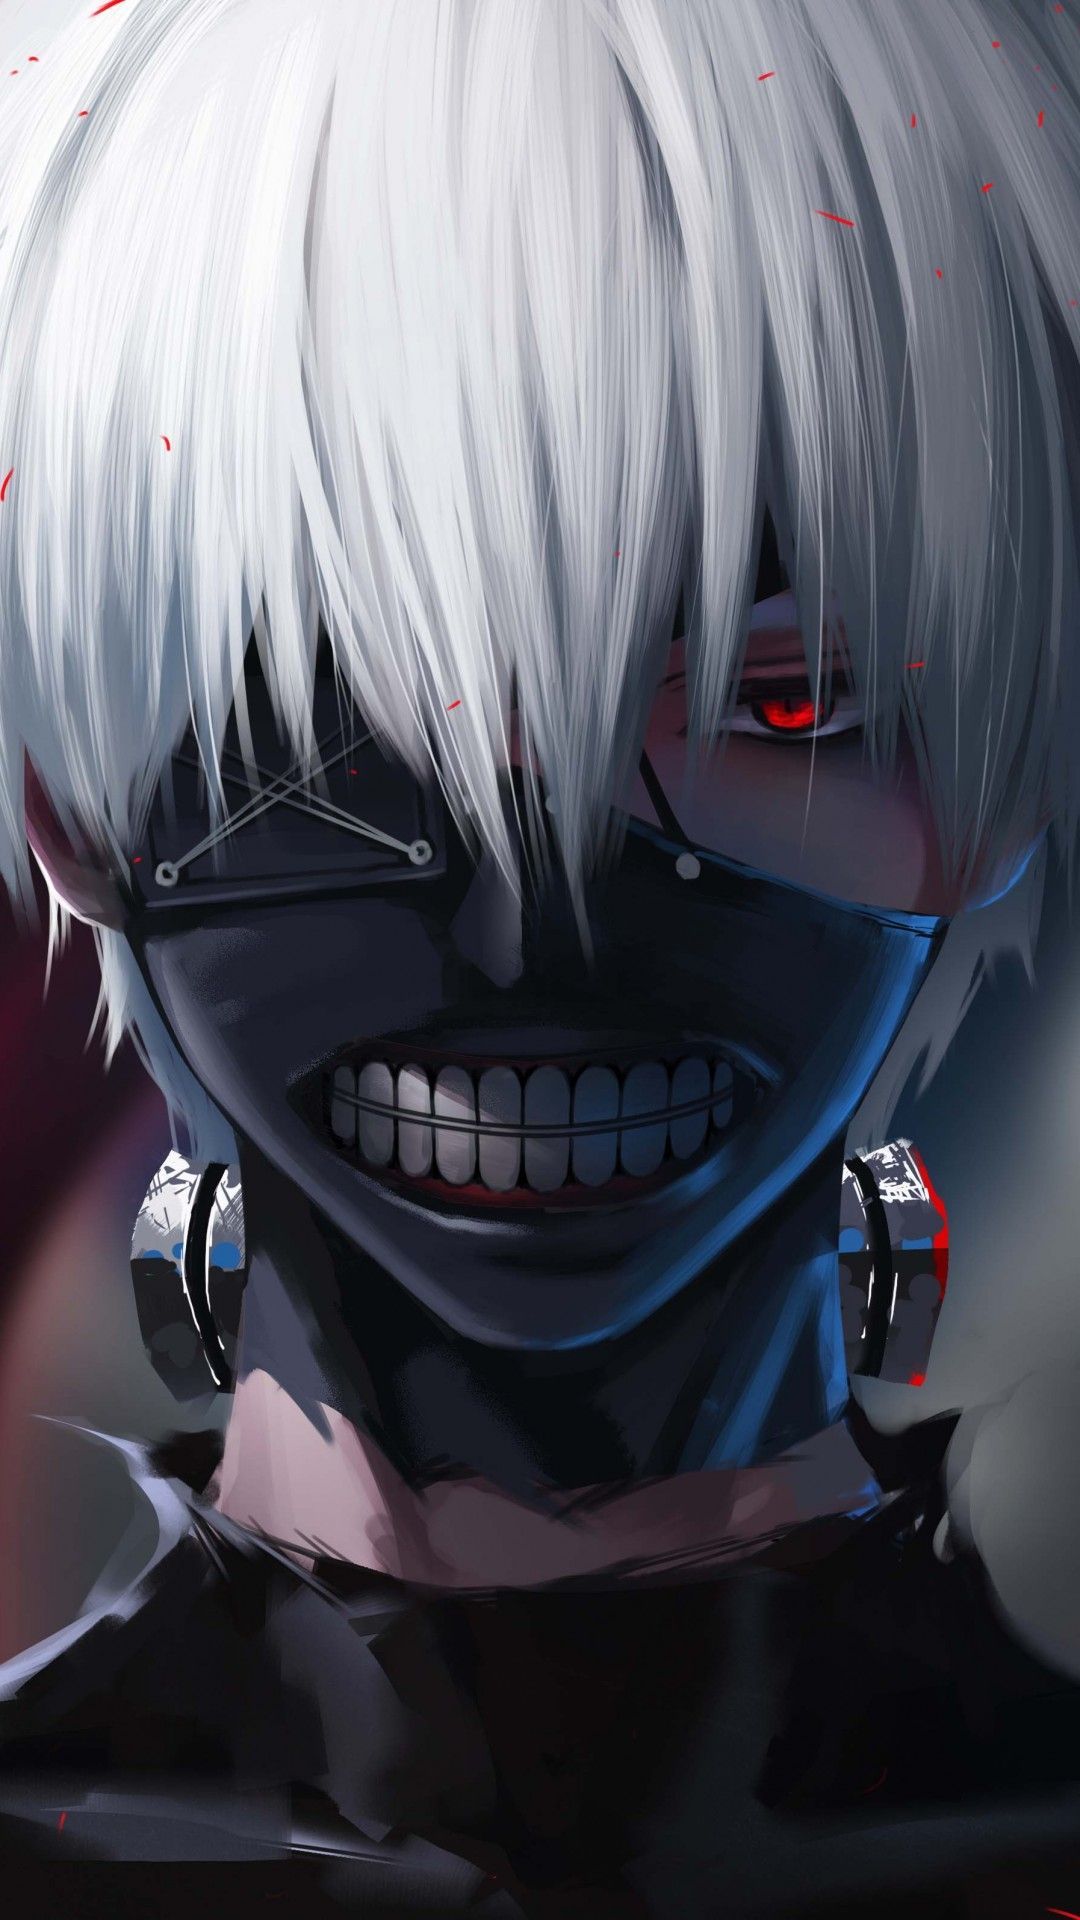 Visit Tokyo Ghoul Wallpapers Home Screen On High Definition Wallpapers at rainbowwallpaper.info, pin if yo… in 2020